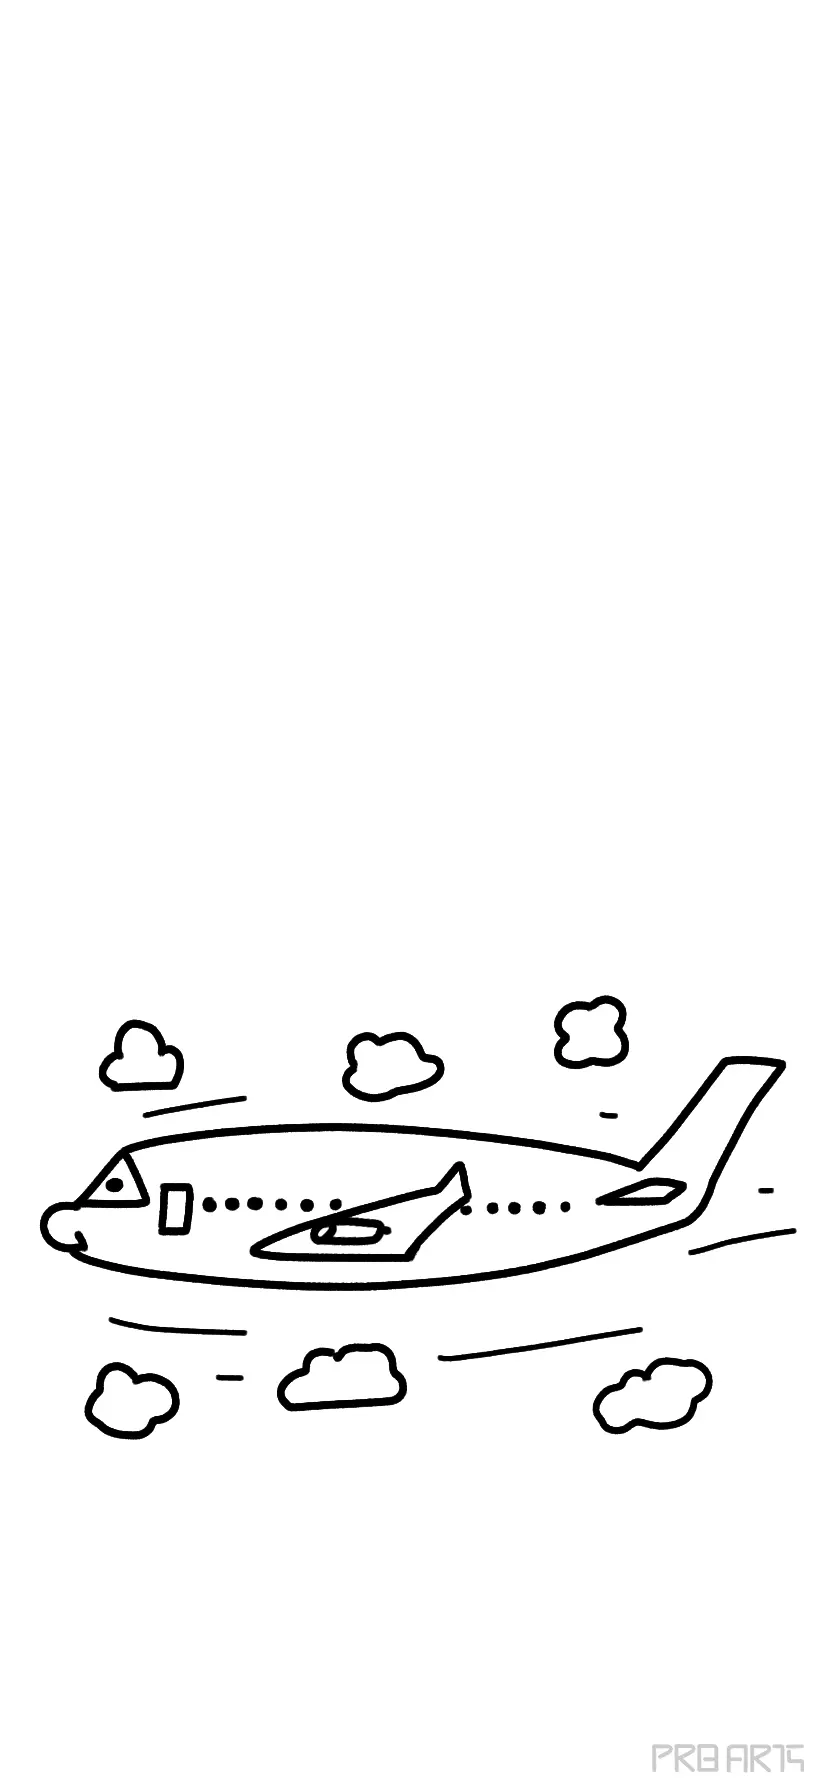 How to Draw an Airplane With Wings Tail  Windows  basicdrawcom